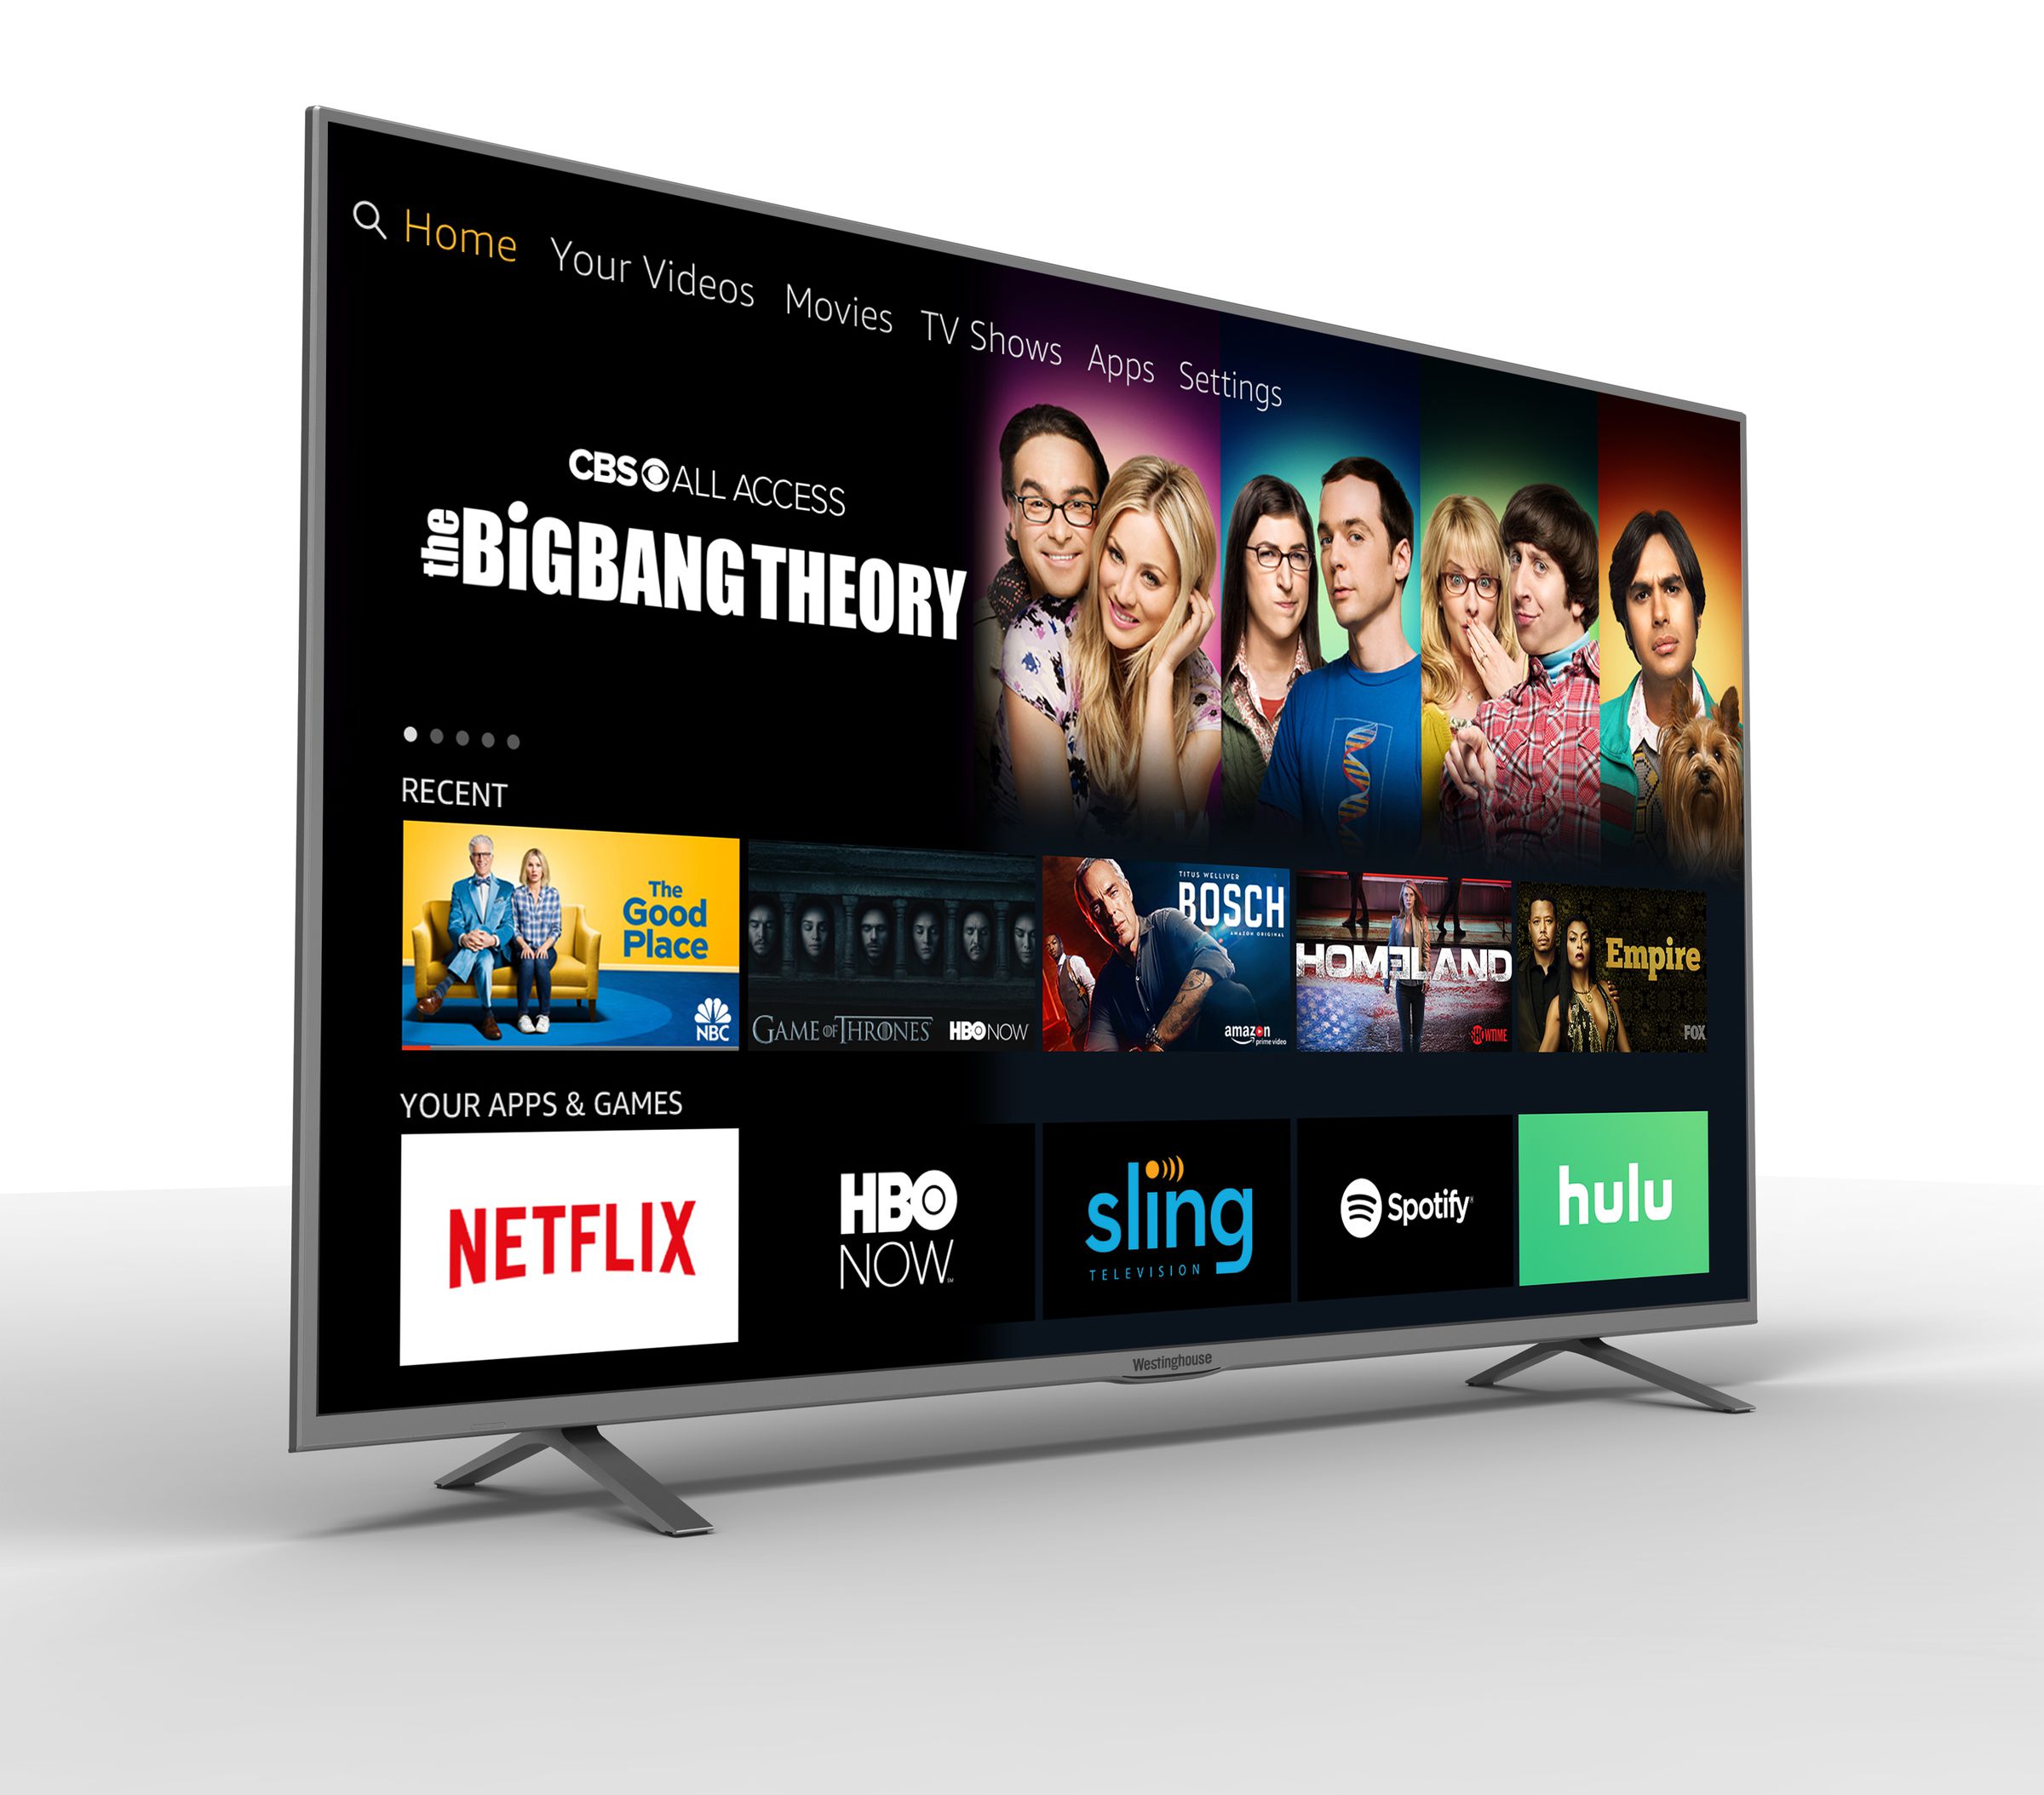 These new Fire TV Edition 4K TVs will be sold under both Element and Westinghouse (above) branding.